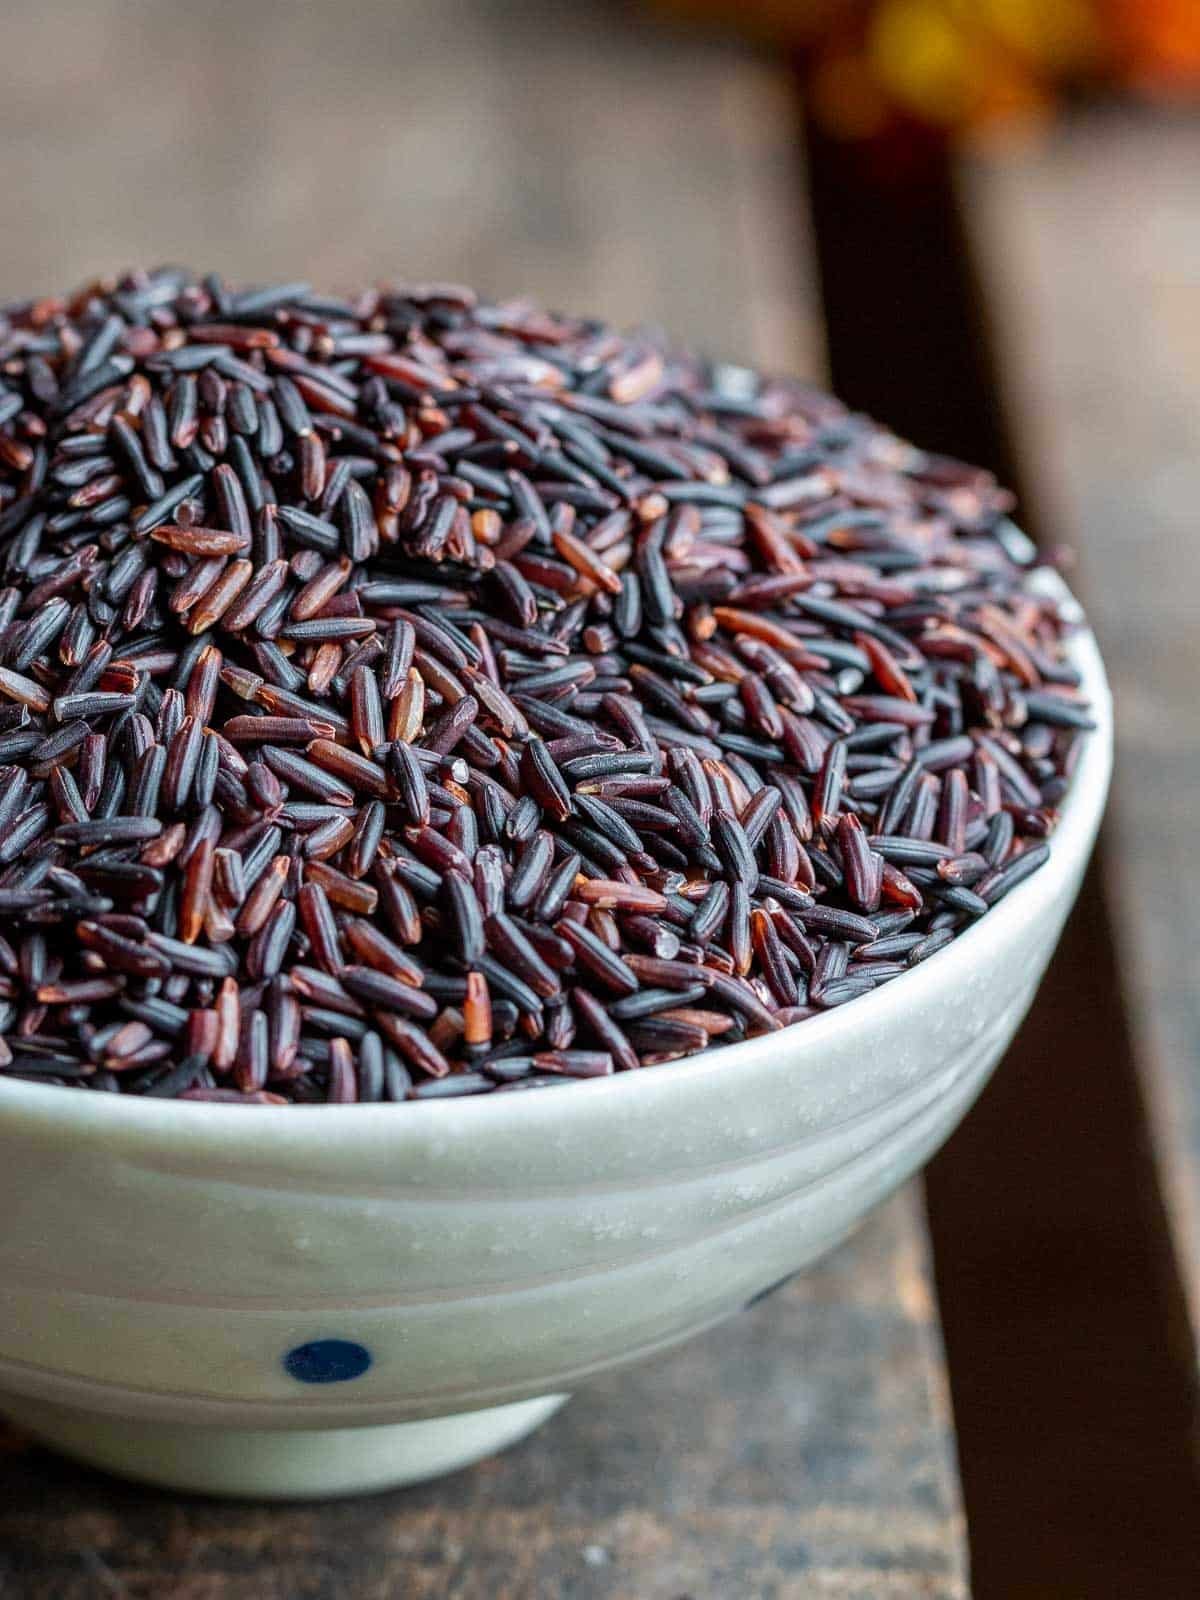 Dry Thai Jasmine Black rice in a white bowl on a wooden board.